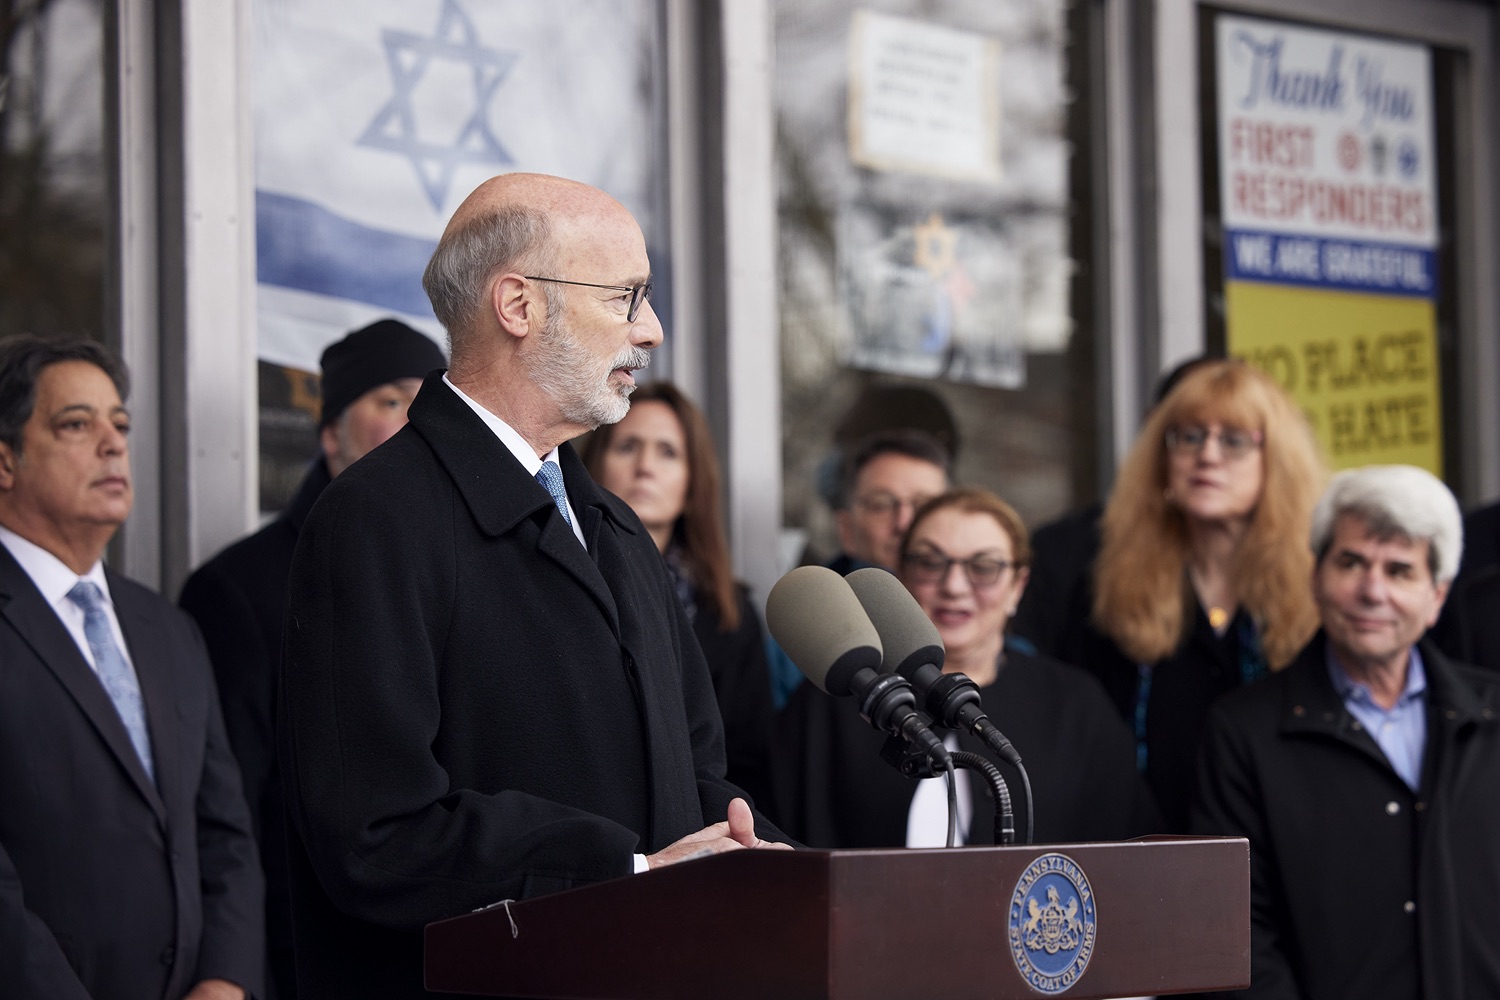 Pennsylvania Governor Tom Wolf speaking with the press.  Governor Tom Wolf visited the Tree of Life in Pittsburgh today to announce $6.6 million in state funding to support the rebuilding and reimagining of the synagogue. The governor was joined by Rabbi Jeffrey Myers, Senate Democratic Leader Jay Costa and members of the Tree of Lifes REMEMBER. REBUILD. RENEW campaign which will transform the site of the worst antisemitic attack in U.S. history into a new place of hope, remembrance, and education. Pittsburgh, PA - December 6, 2021<br><a href="https://filesource.amperwave.net/commonwealthofpa/photo/20308_gov_treeOfLife_dz_018_copy.jpg" target="_blank">⇣ Download Photo</a>